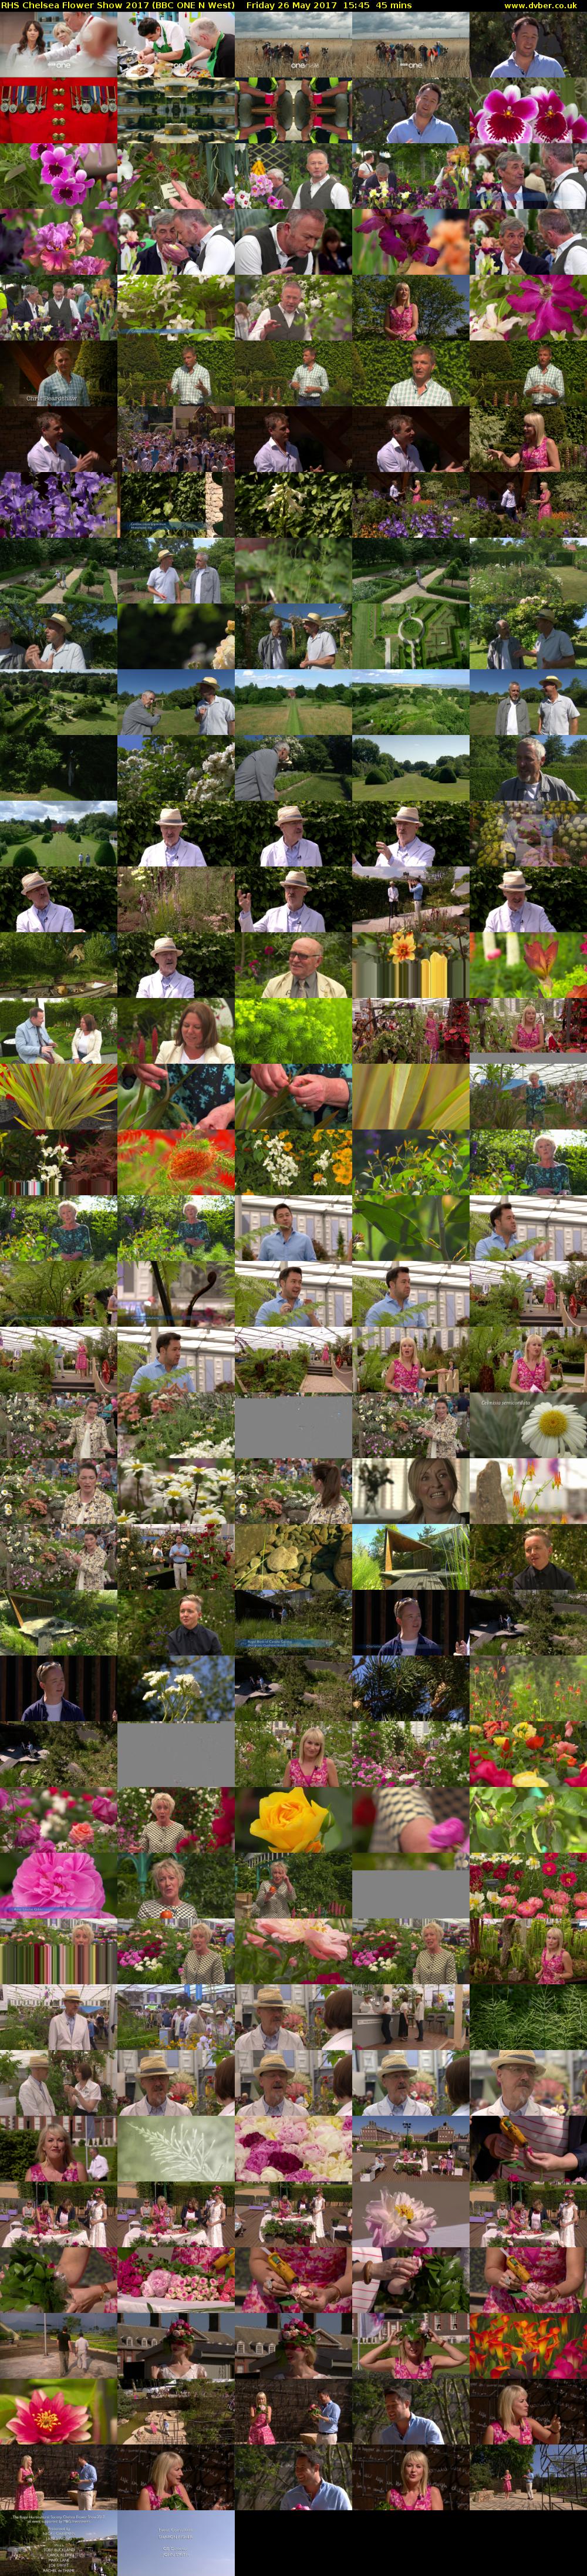 RHS Chelsea Flower Show 2017 (BBC ONE N West) Friday 26 May 2017 15:45 - 16:30